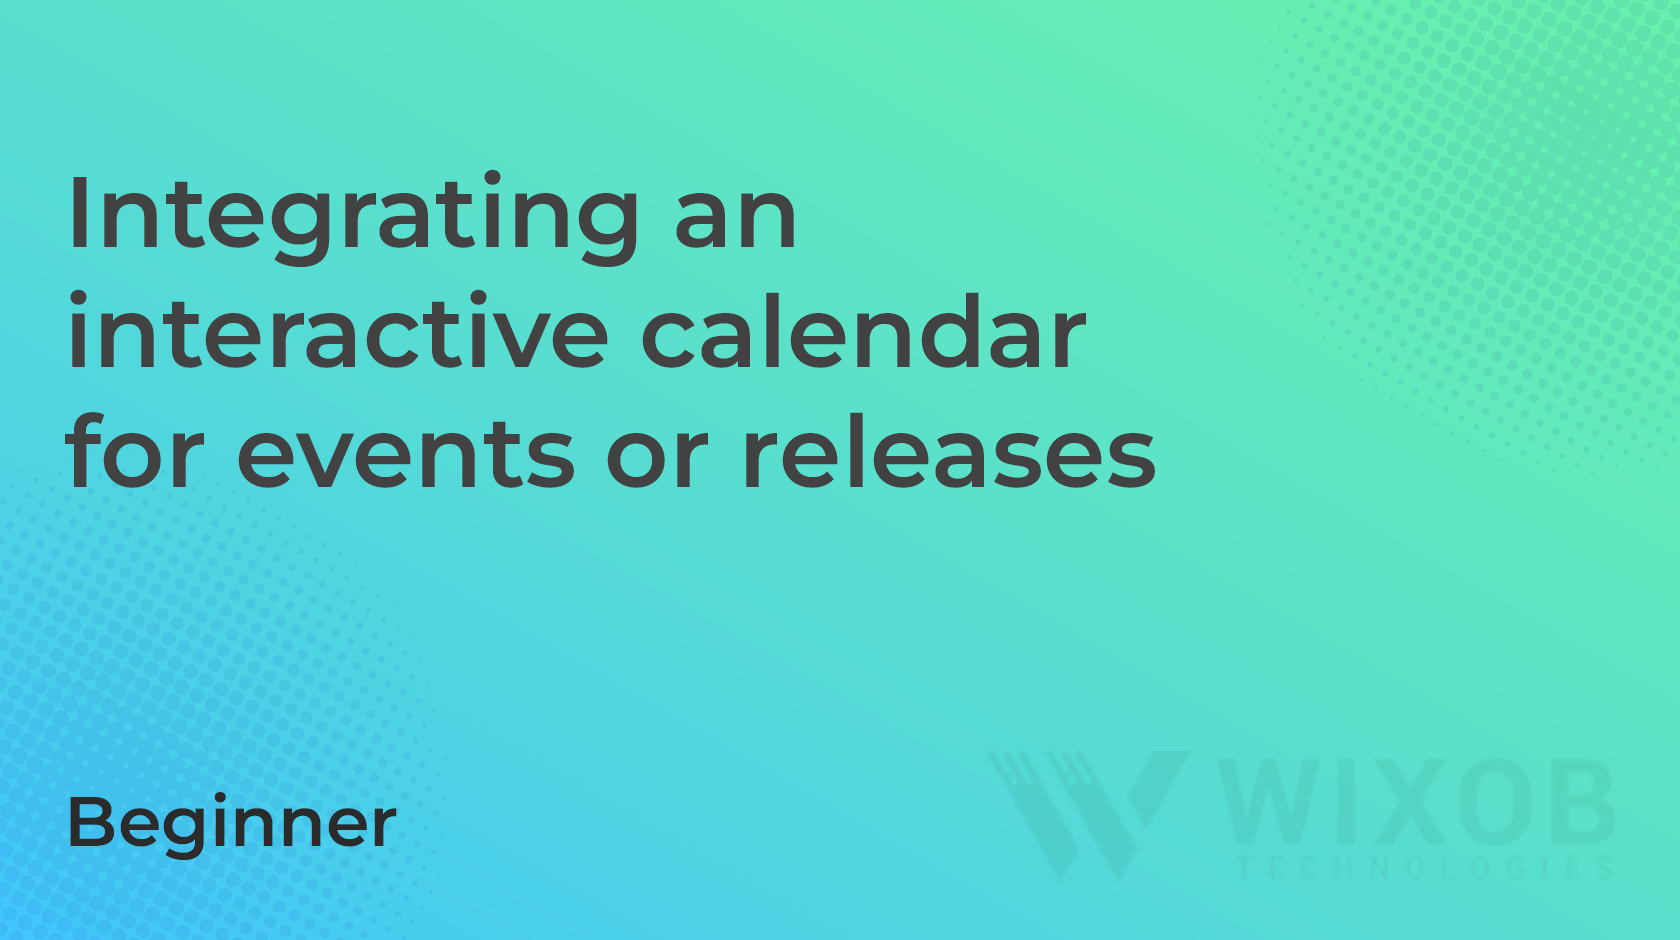 Integrating an interactive calendar for events or releases